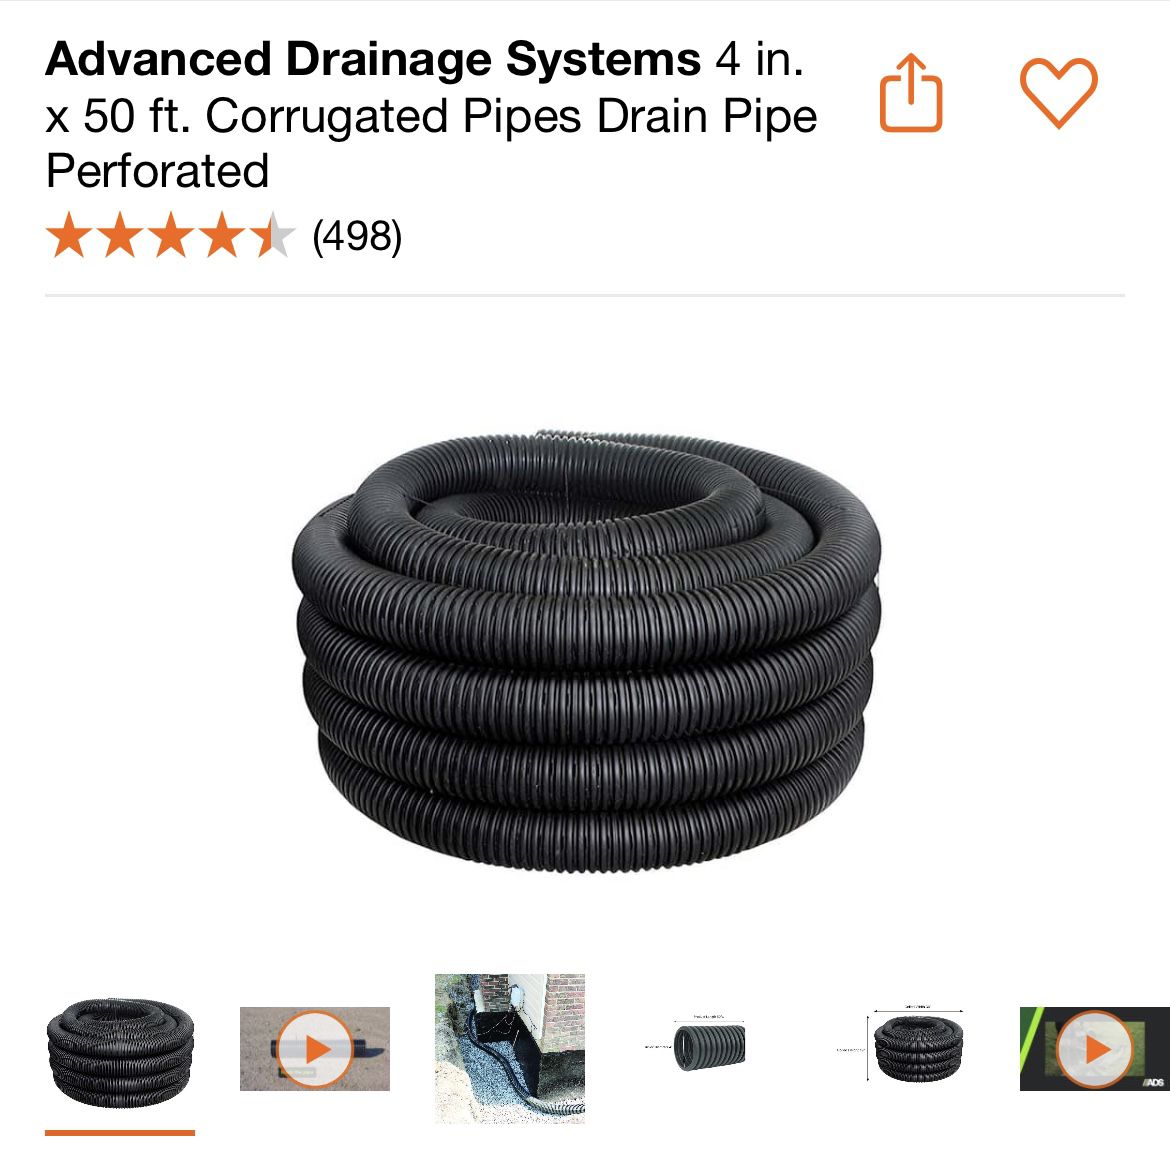 Advanced Drainage Systems 4 in. x 50 ft. Corrugated Pipes Drain Pipe Perforated